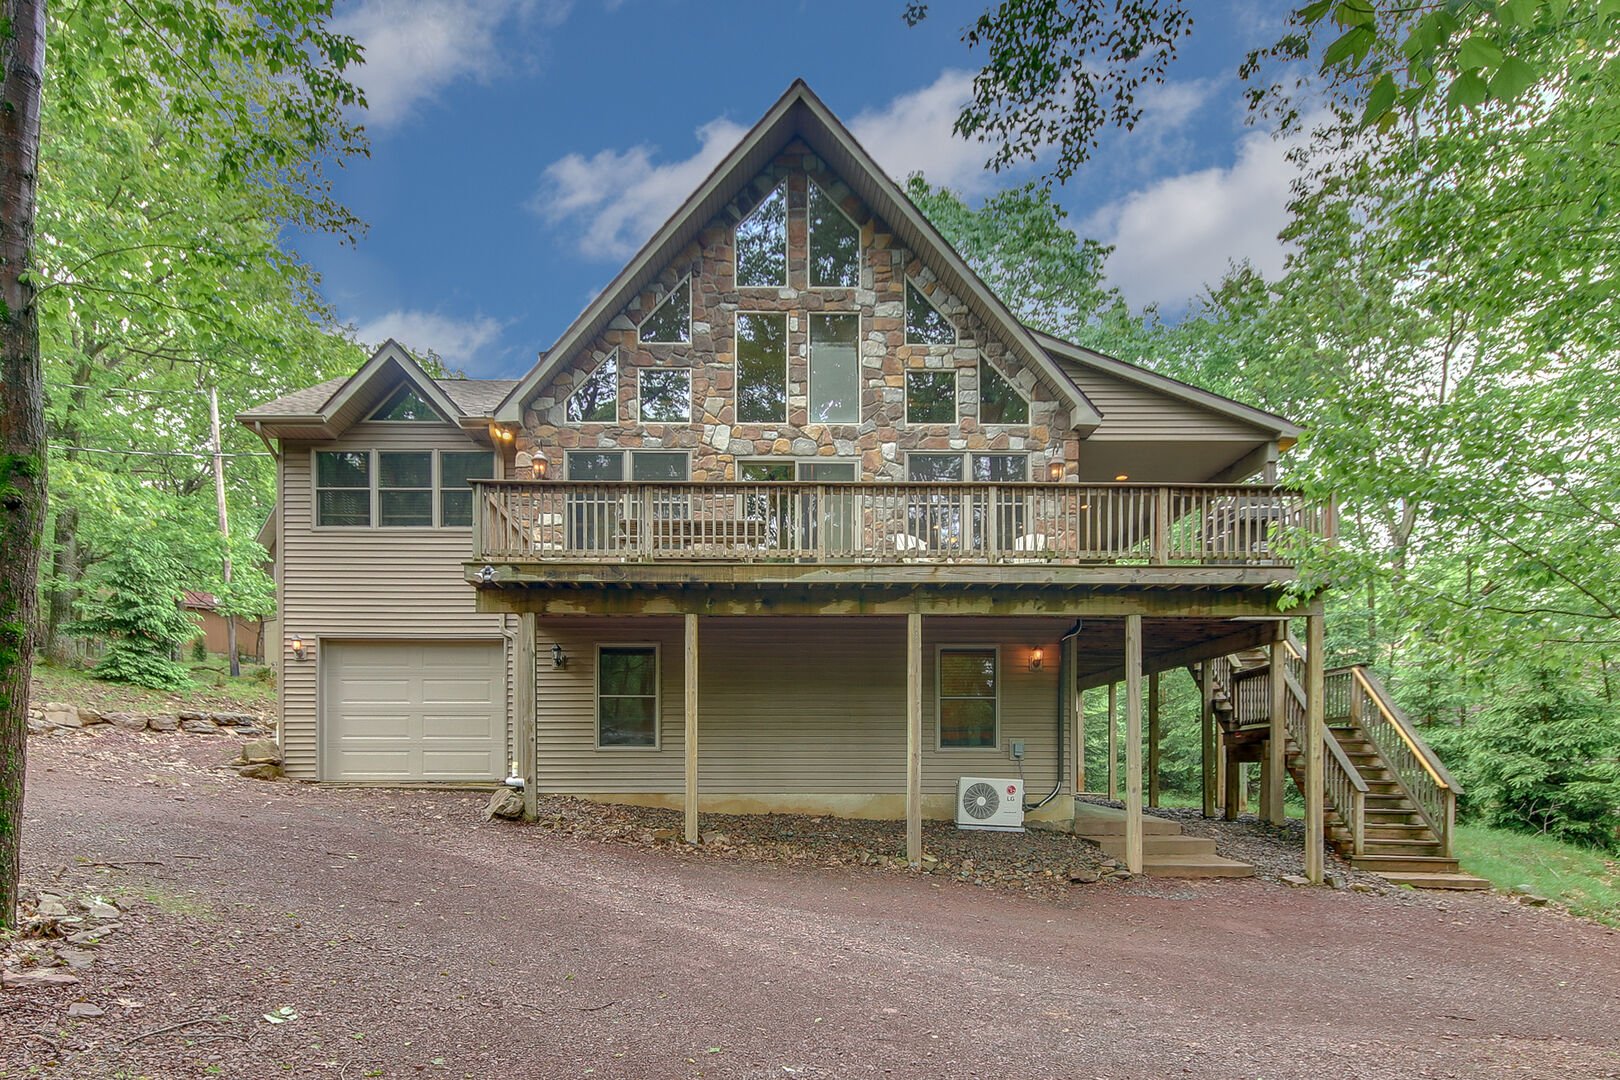 Front Picture of our Lake Harmony Vacation Home, Bobcat.